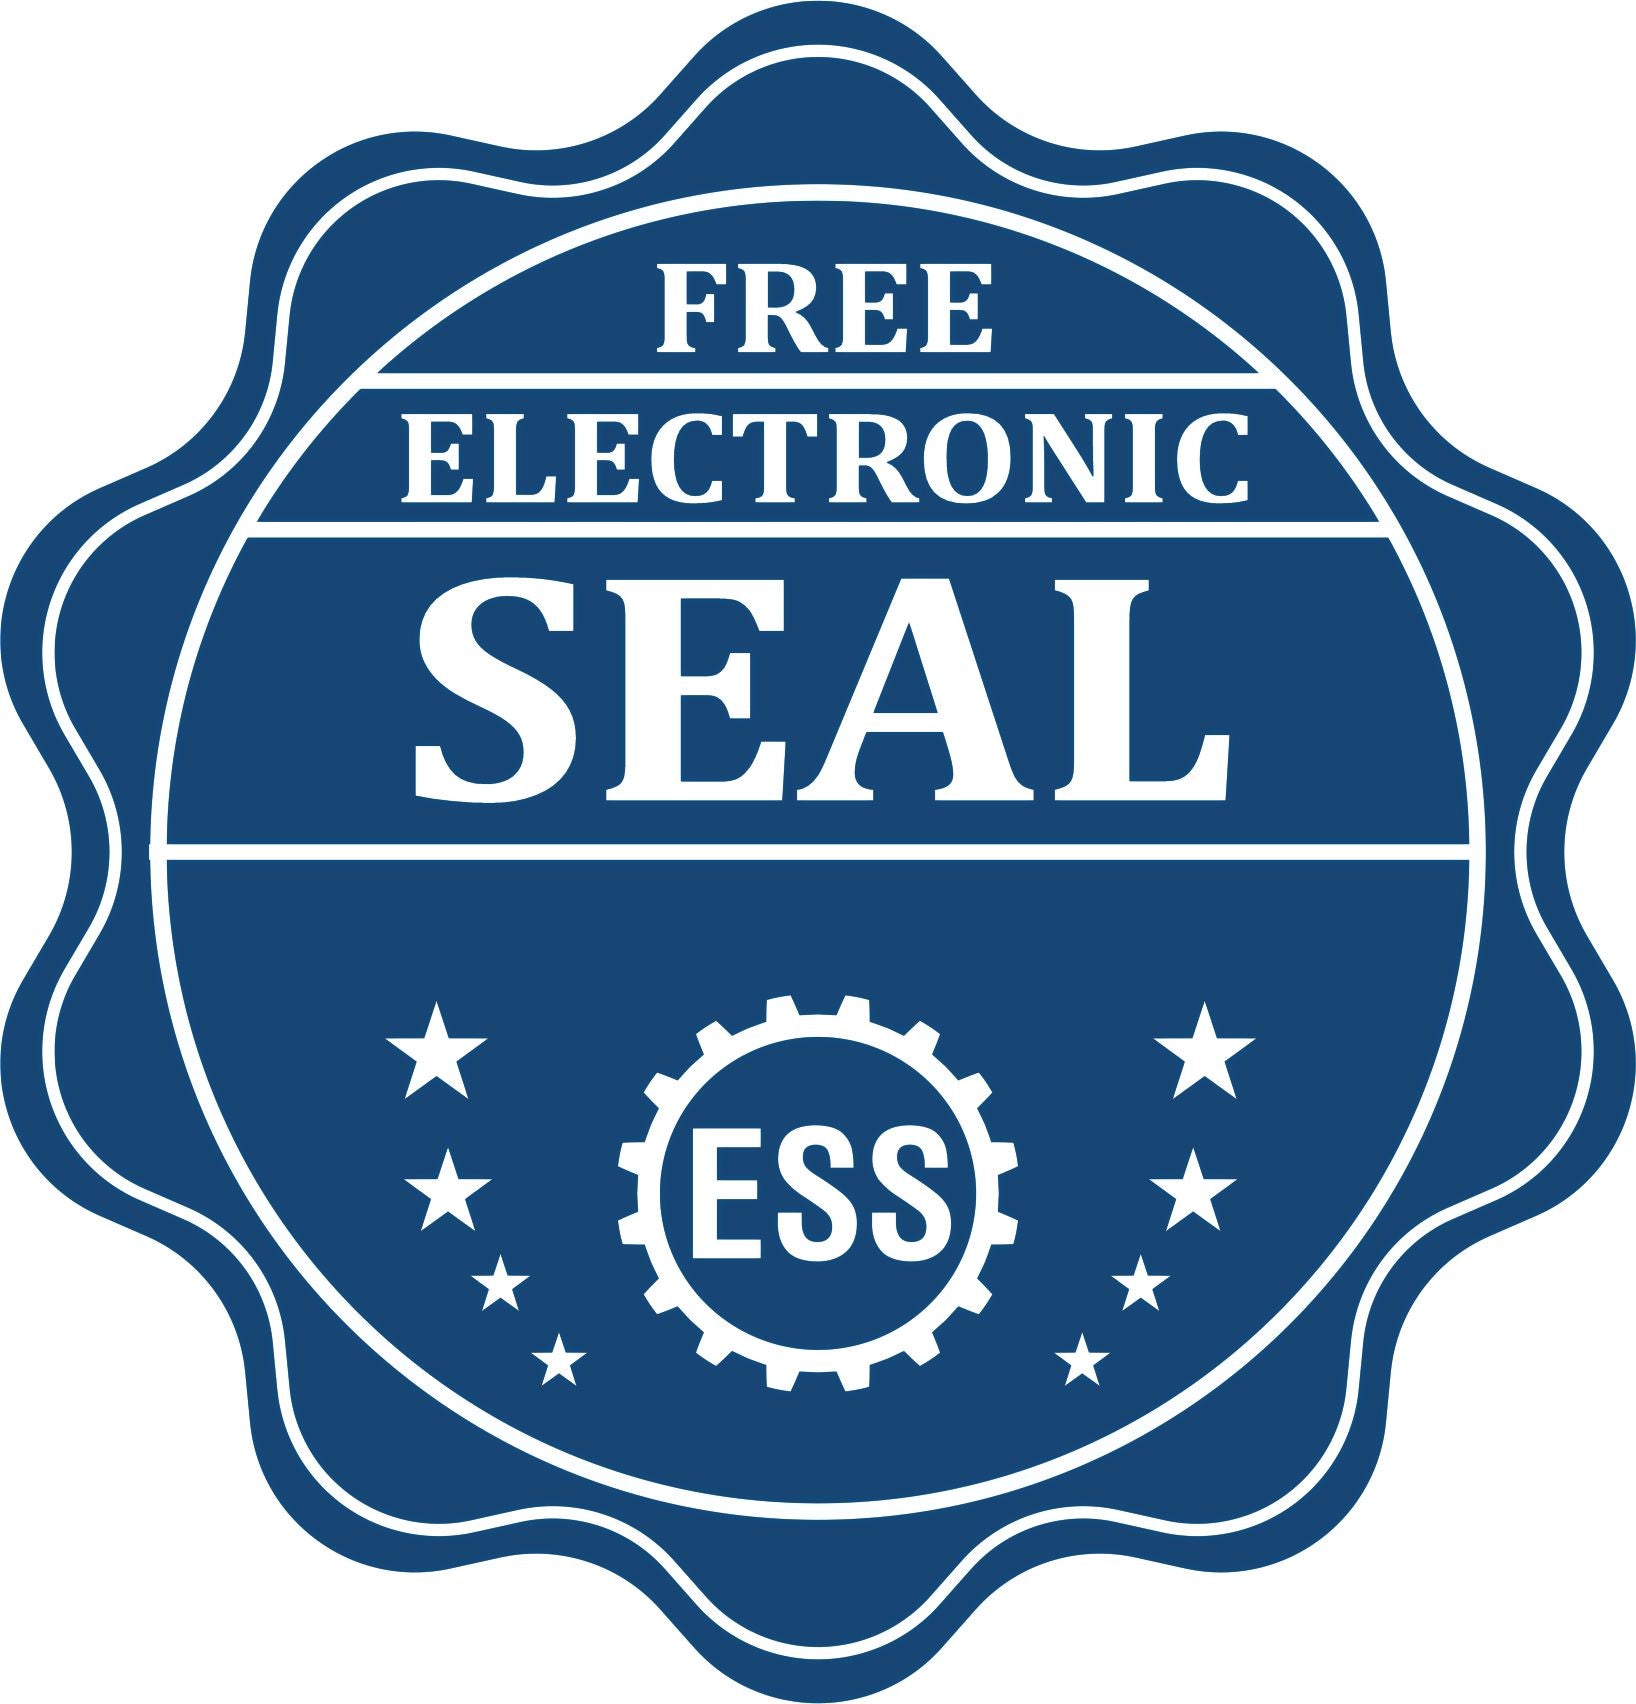 A badge showing a free electronic seal for the Gift Michigan Landscape Architect Seal with stars and the ESS gear on the emblem.